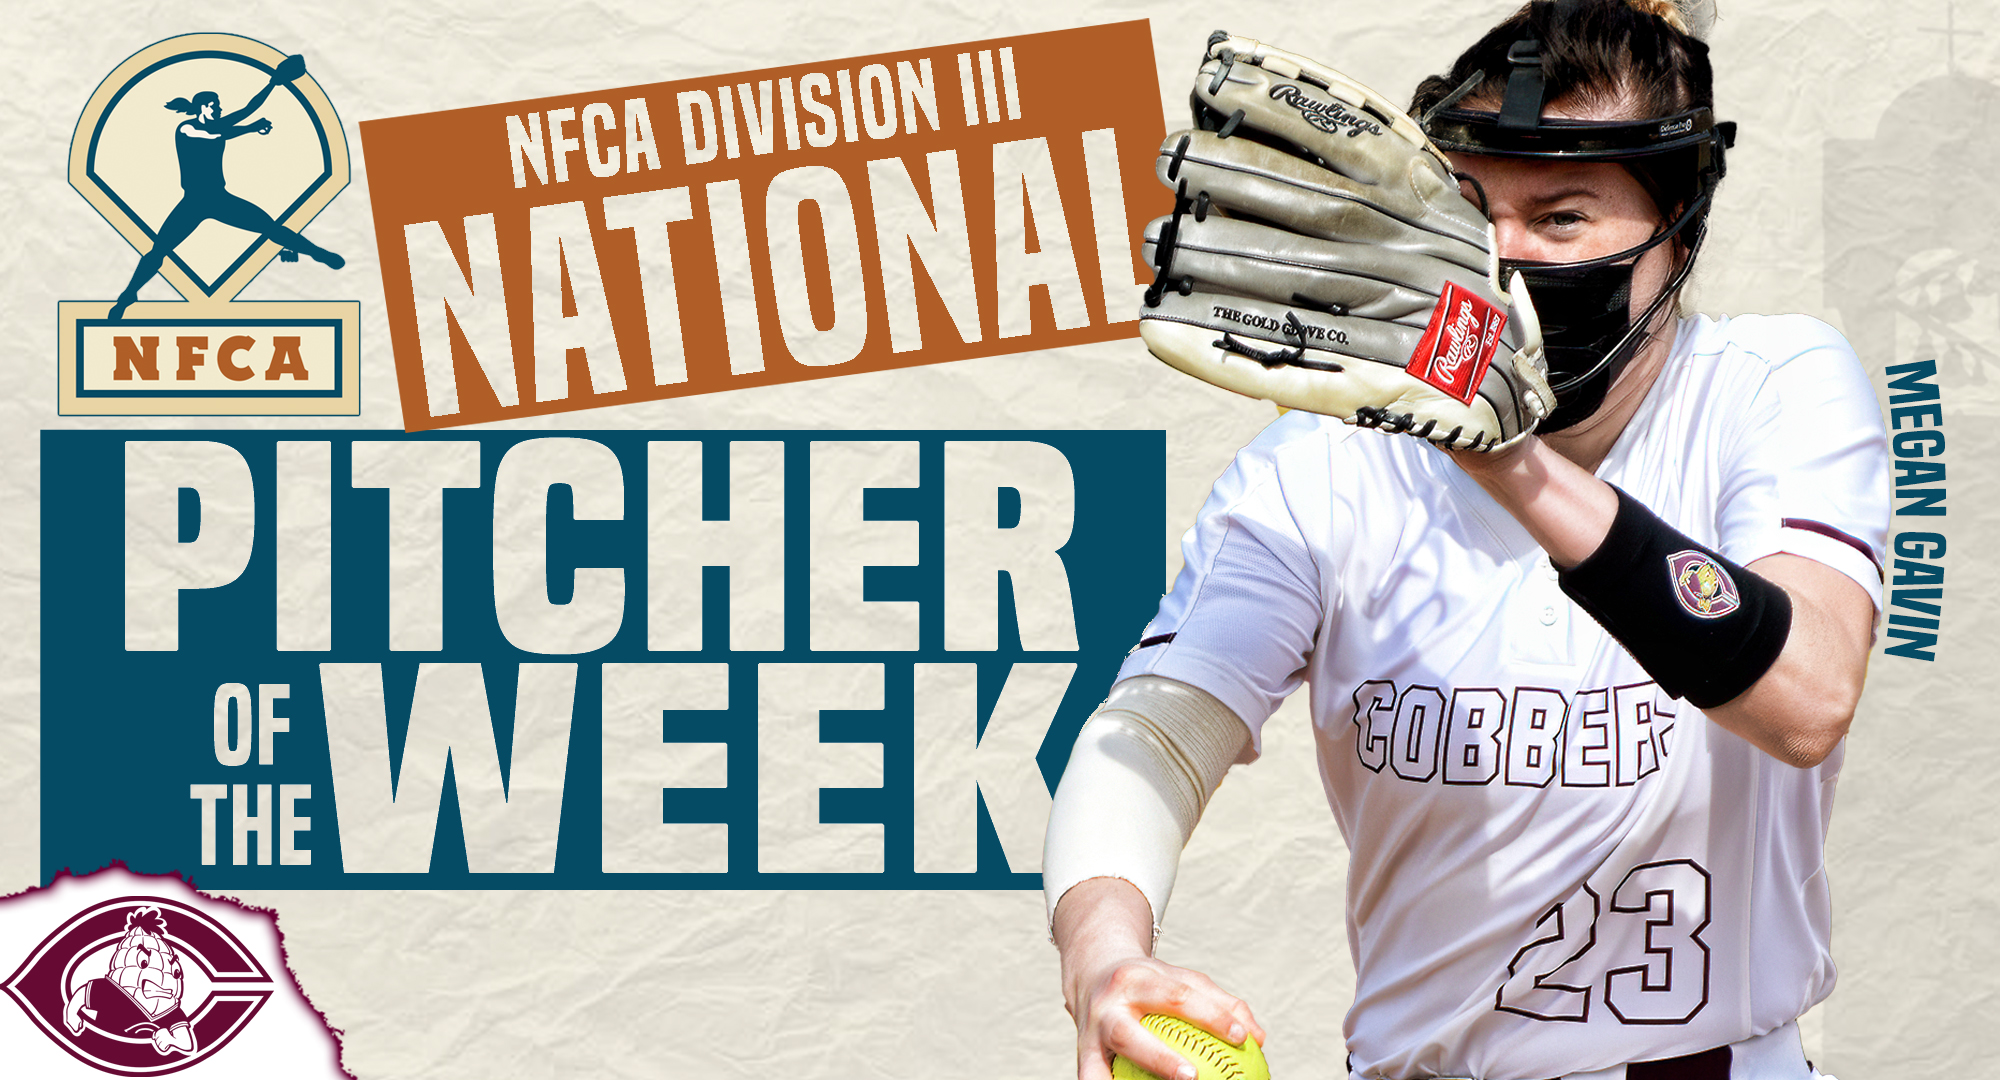 Megan Gavin became the first pitcher in school history to earn Wilson/NFCA National Pitcher of the Week honors after she struck out 36 and had a 0.00 ERA in 17.1 innings.